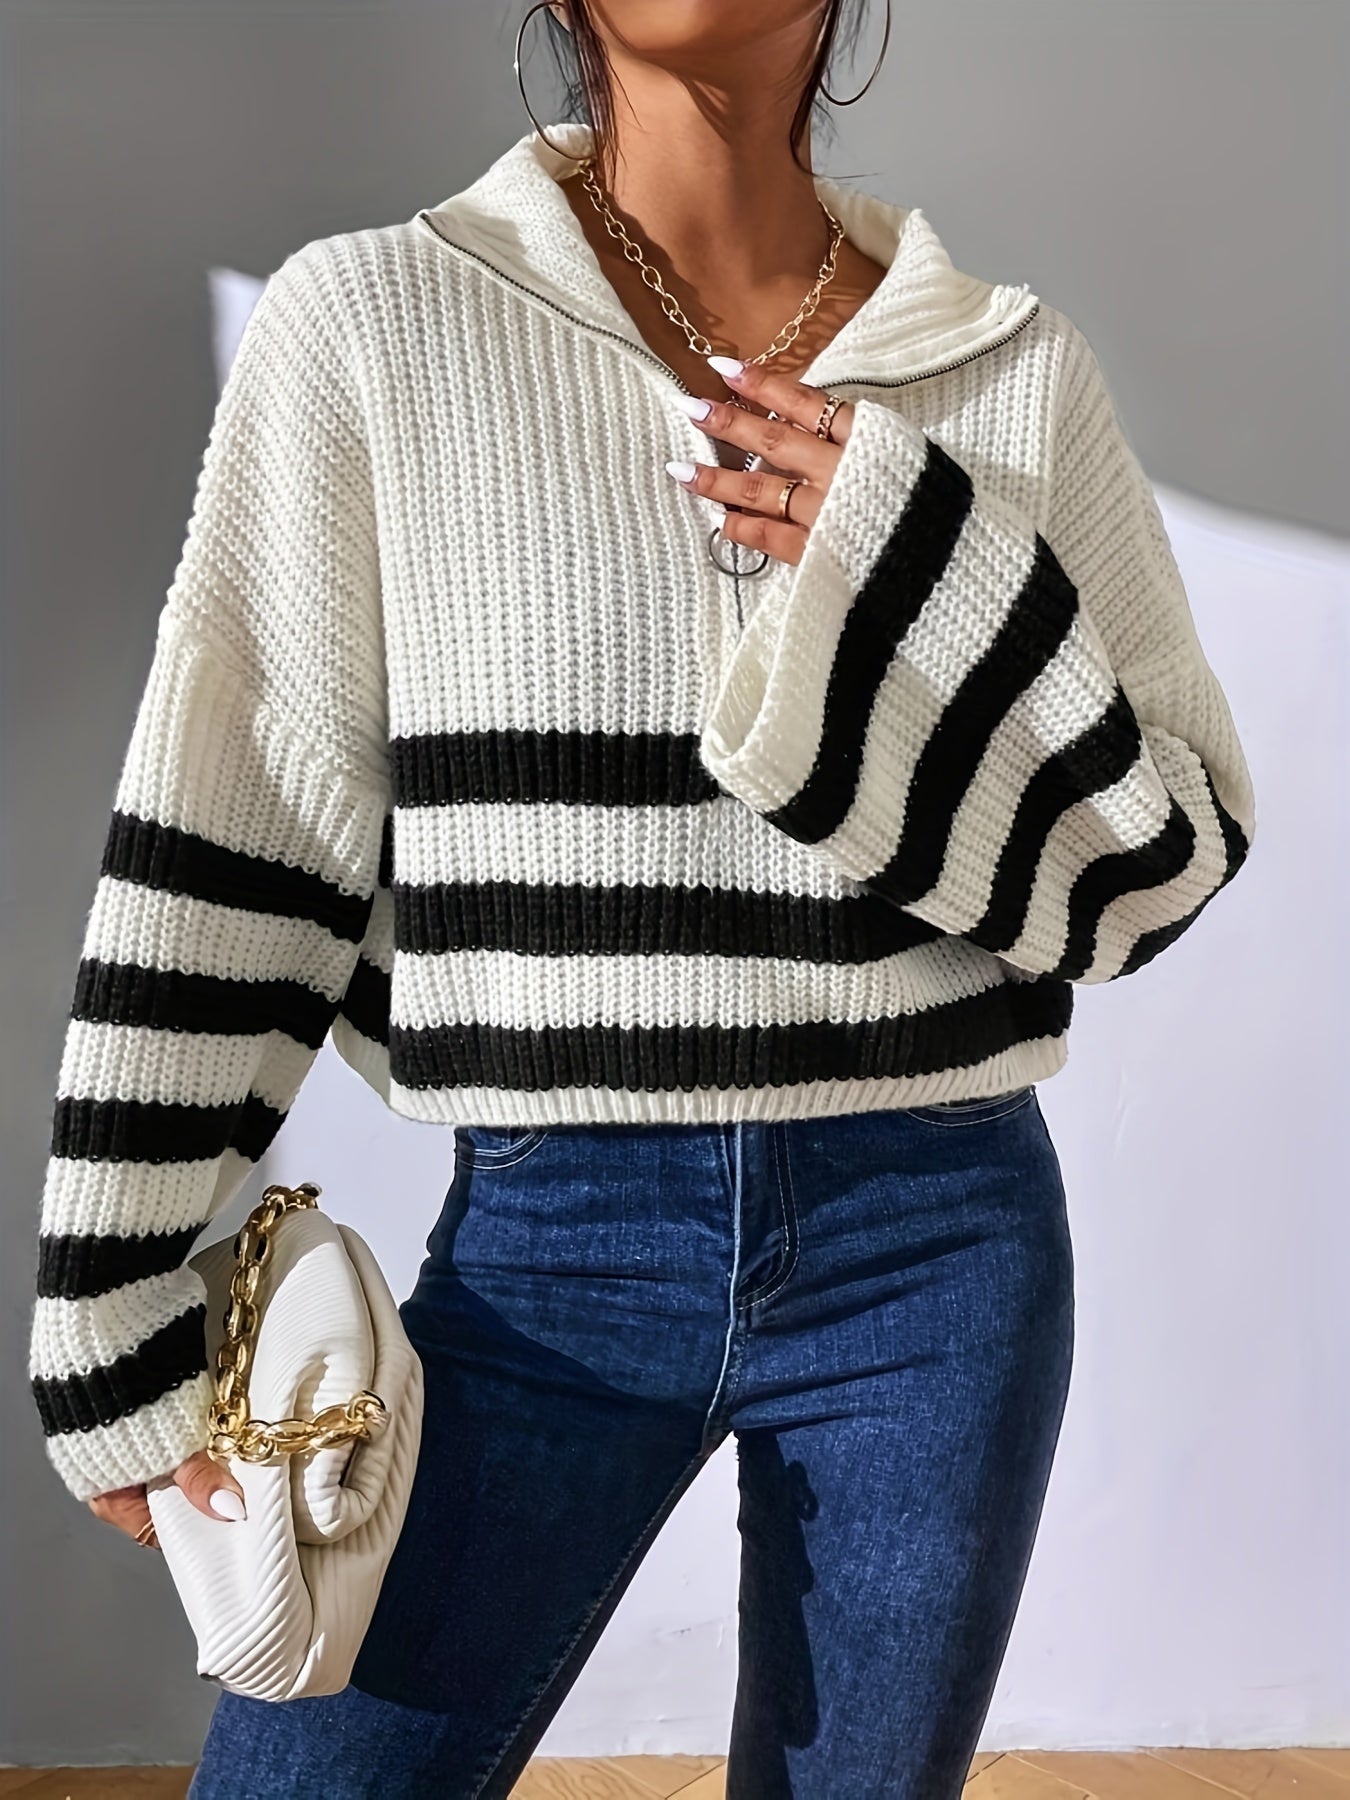 Antmvs Striped Pattern Half Zip Pullover Sweater, Casual Bell Sleeve Sweater For Fall & Winter, Women's Clothing